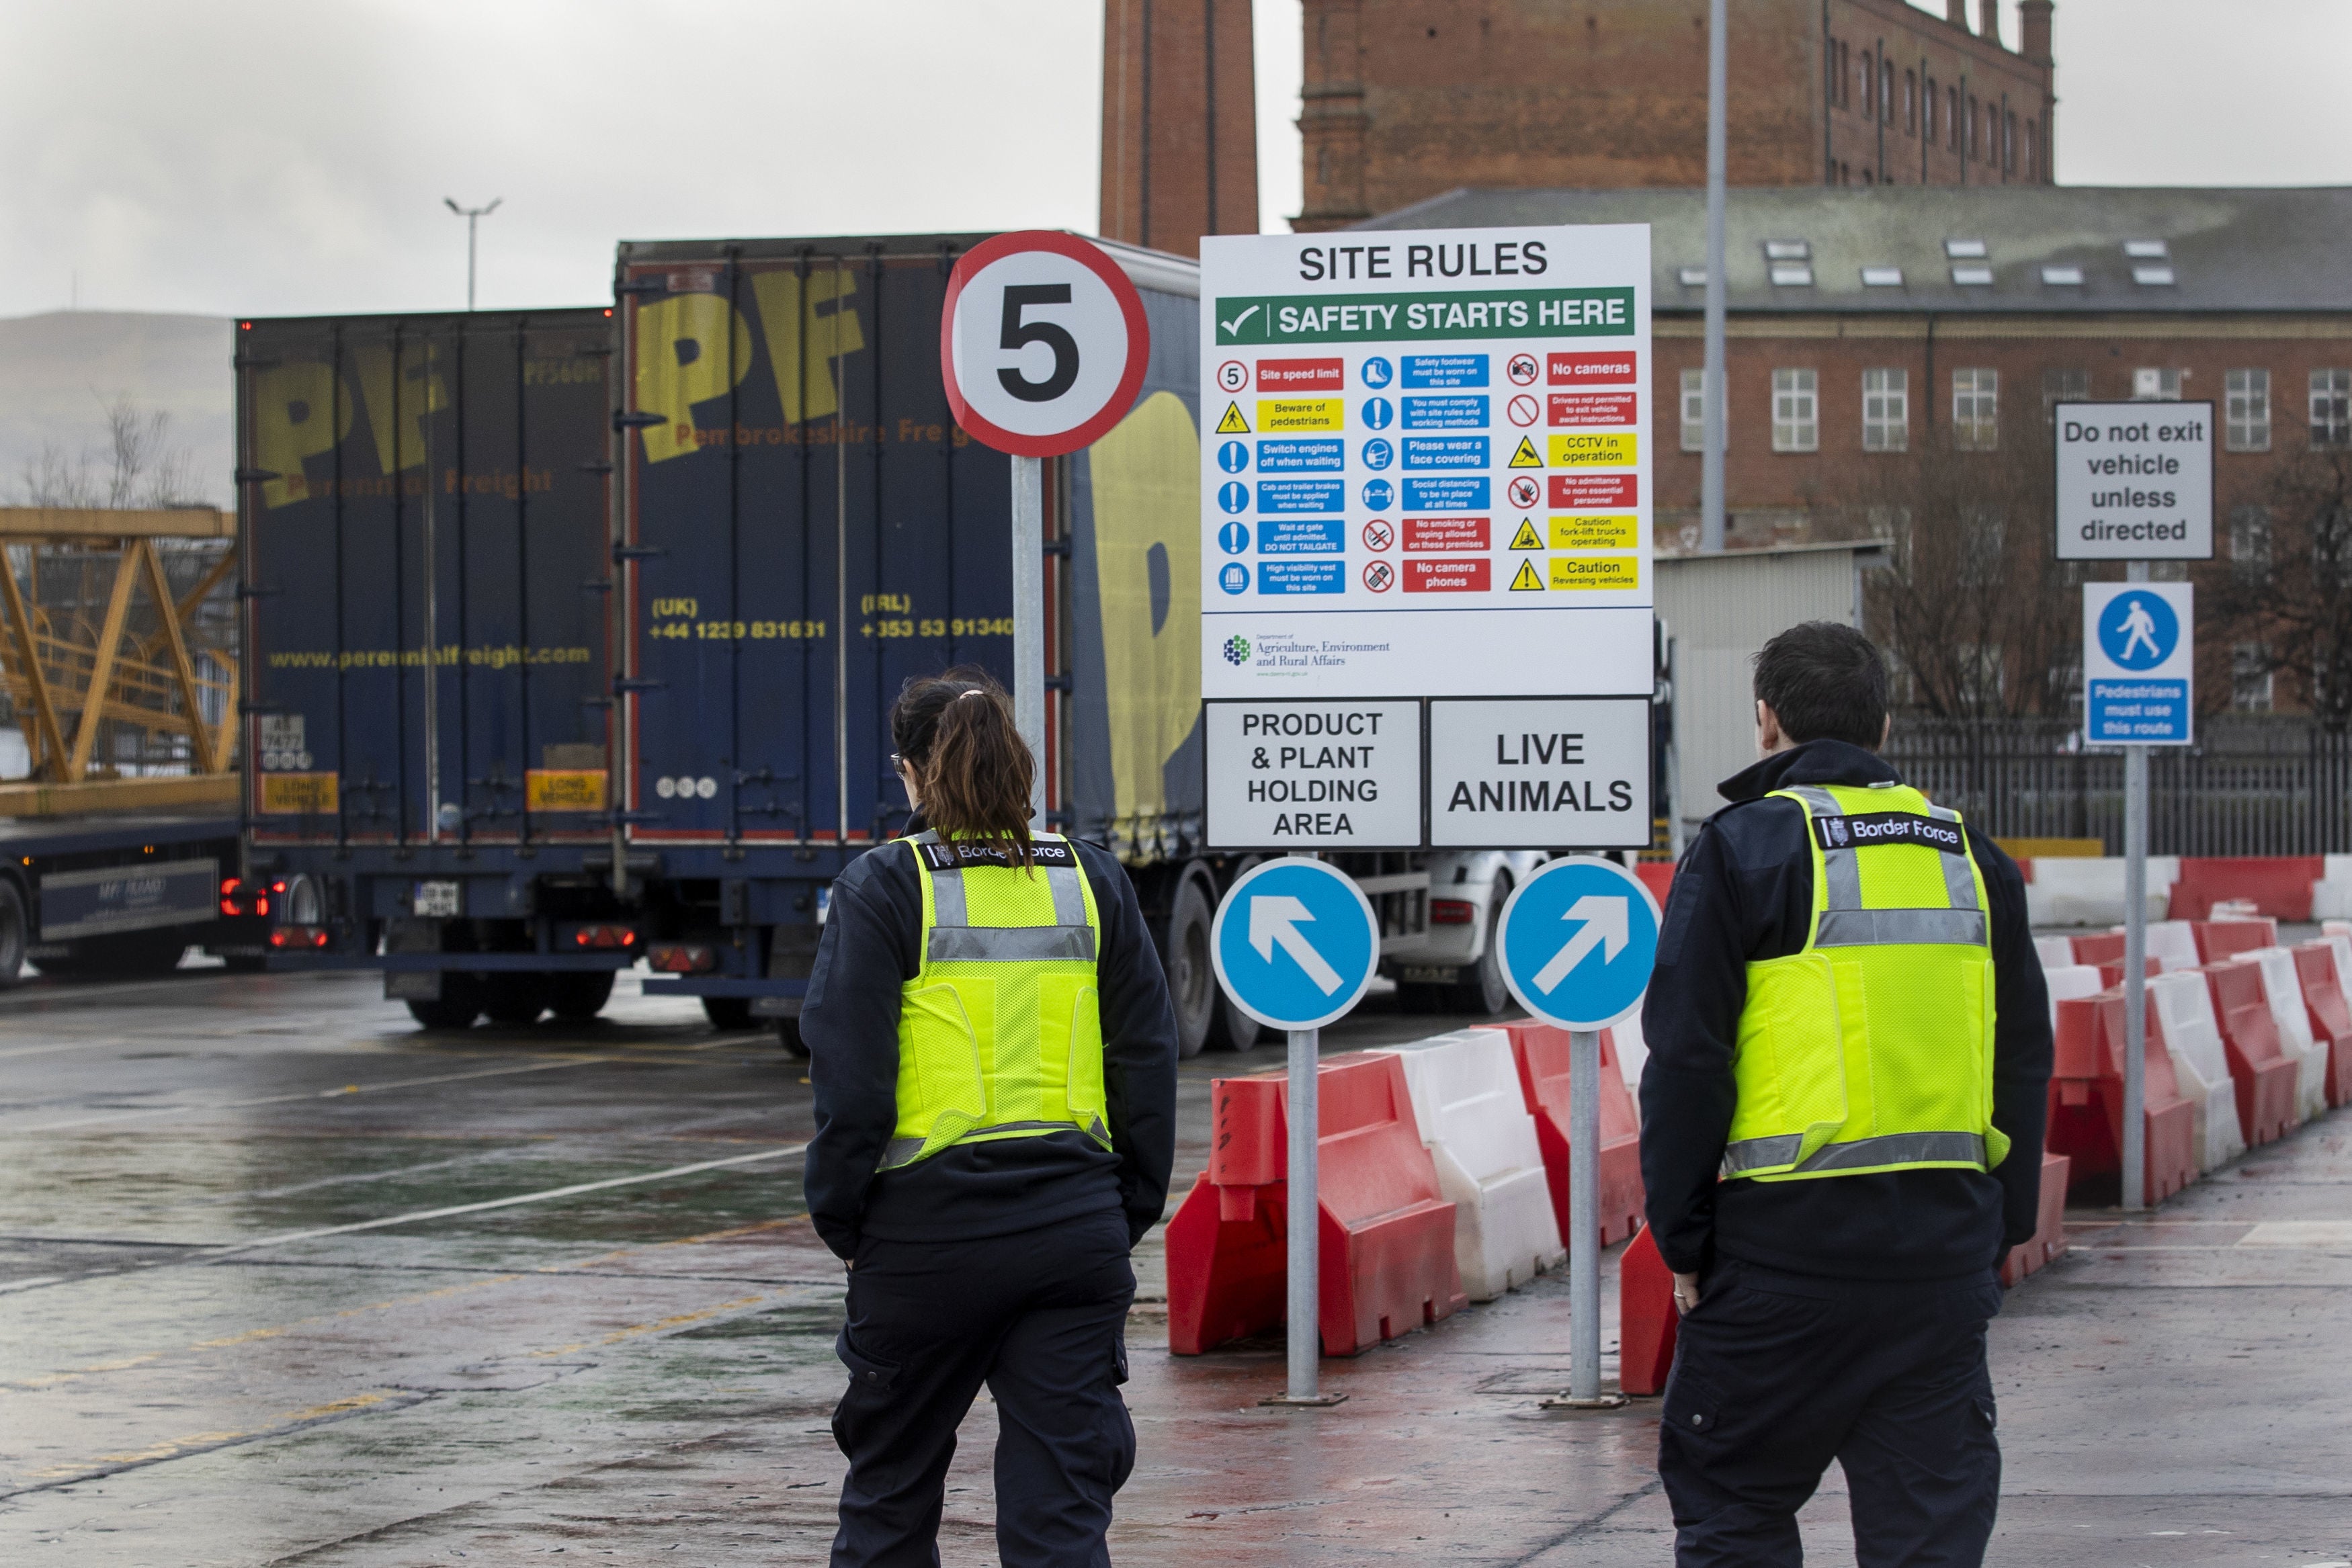 Goods arriving in Northern Ireland from Great Britain are subject to checks under the protocol (Liam McBurney/PA)